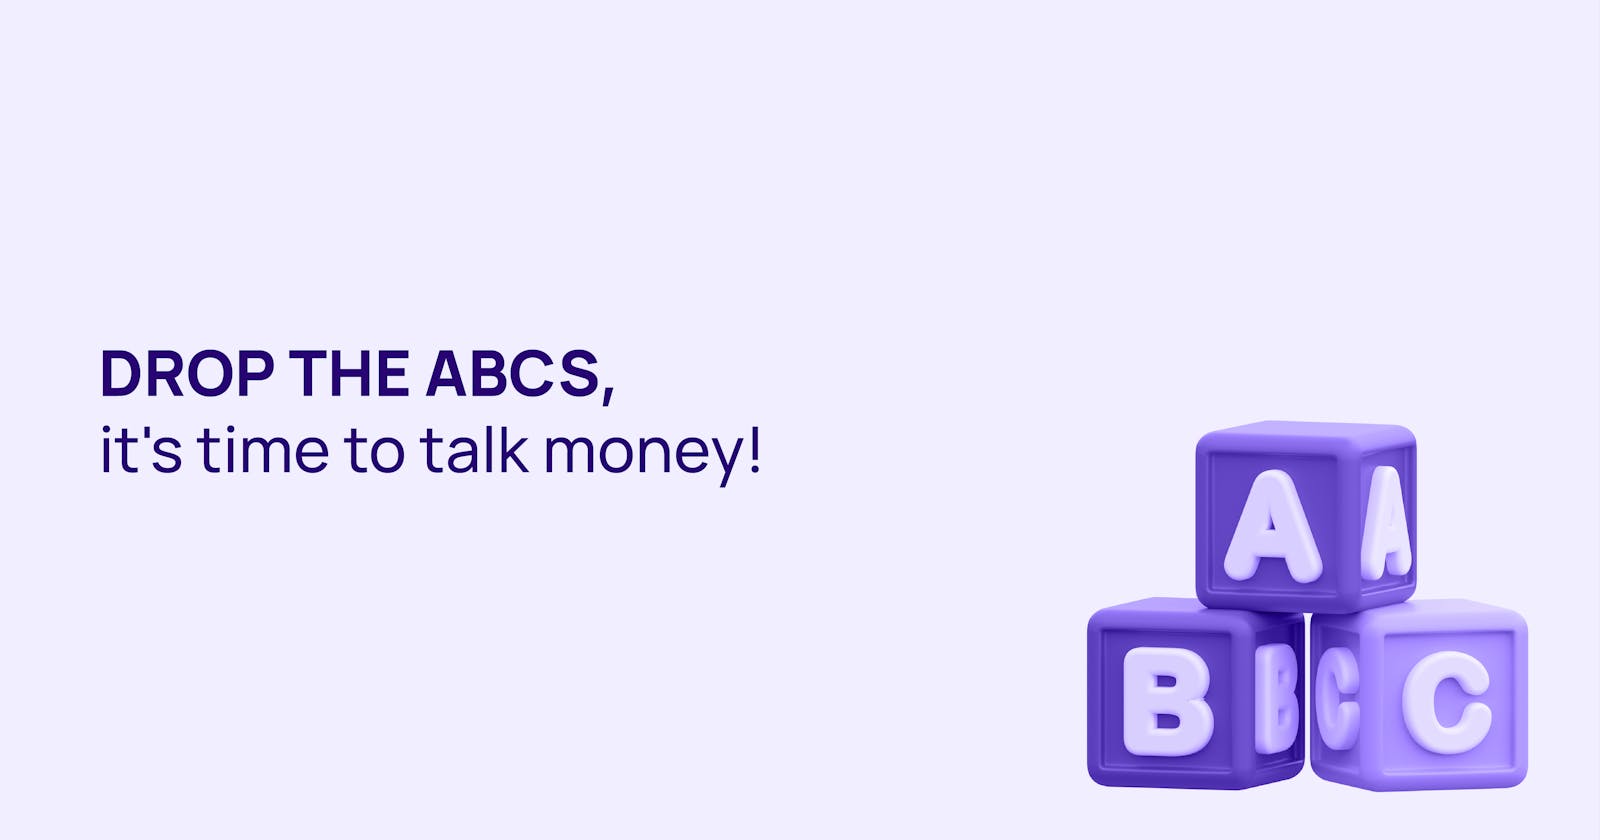 Drop the ABCs, it's time to talk money!